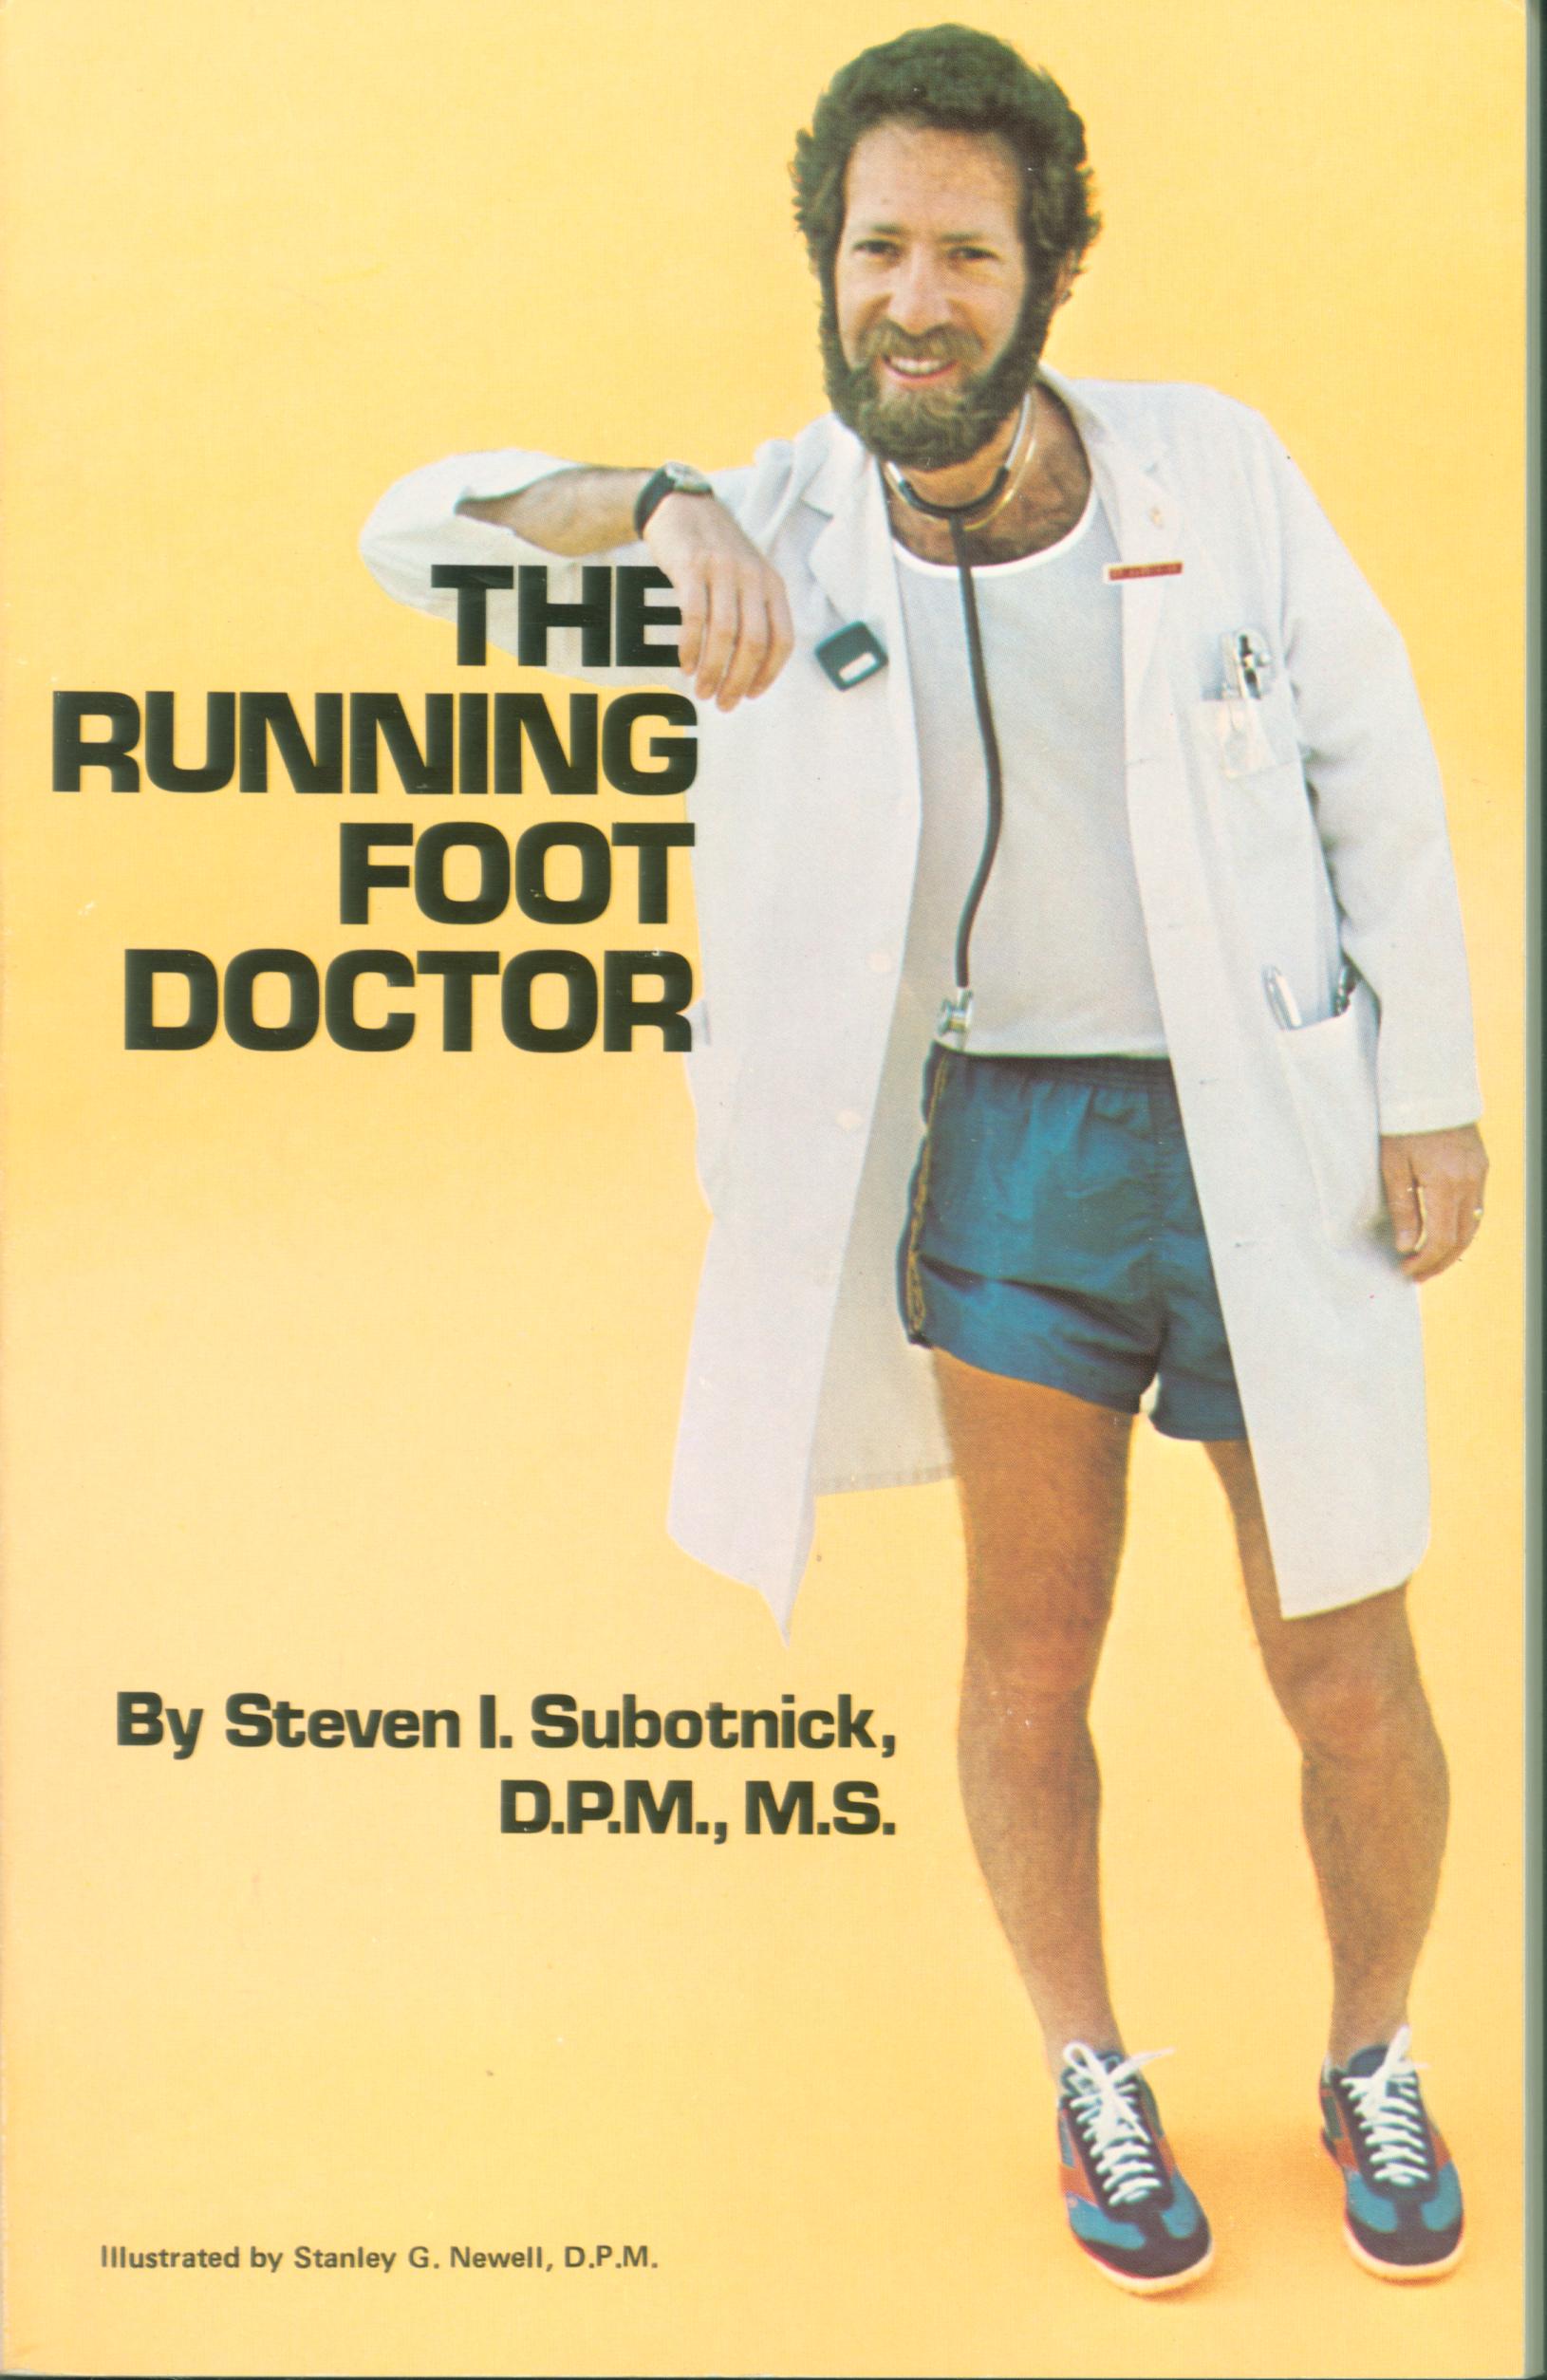 THE RUNNING FOOT DOCTOR. 